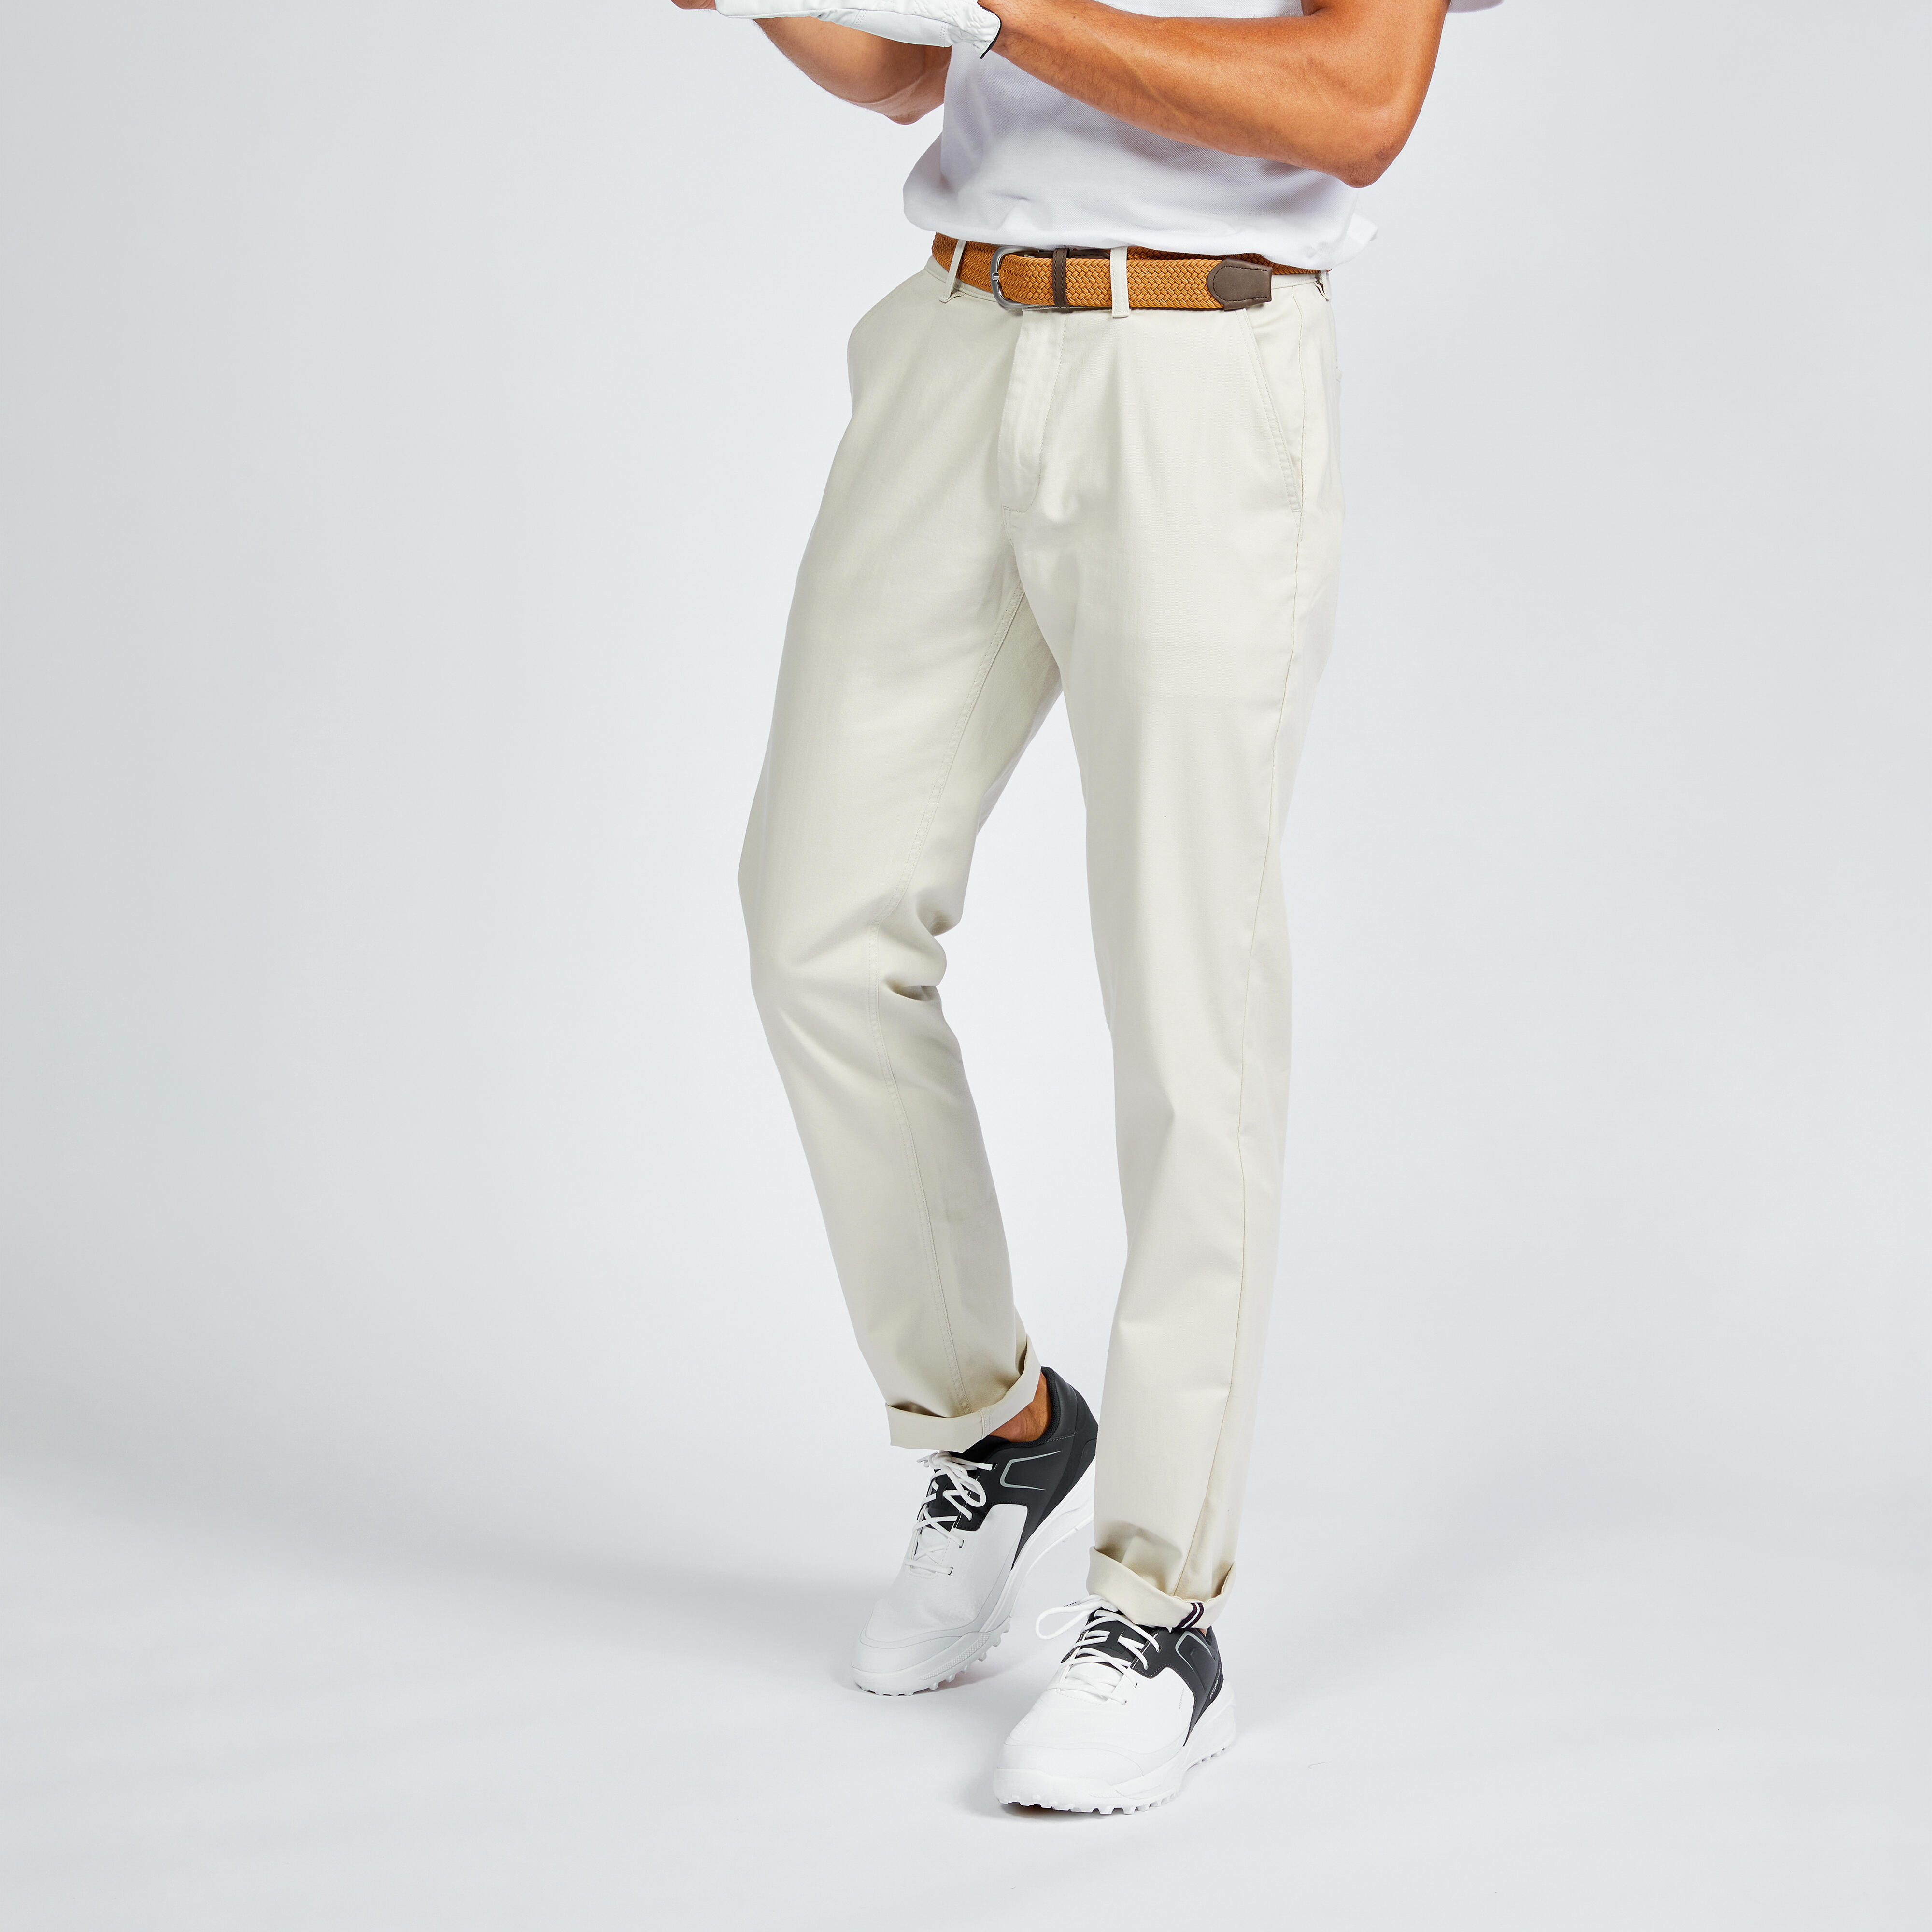 Ladies Golf Trousers  Love Golf Clothes